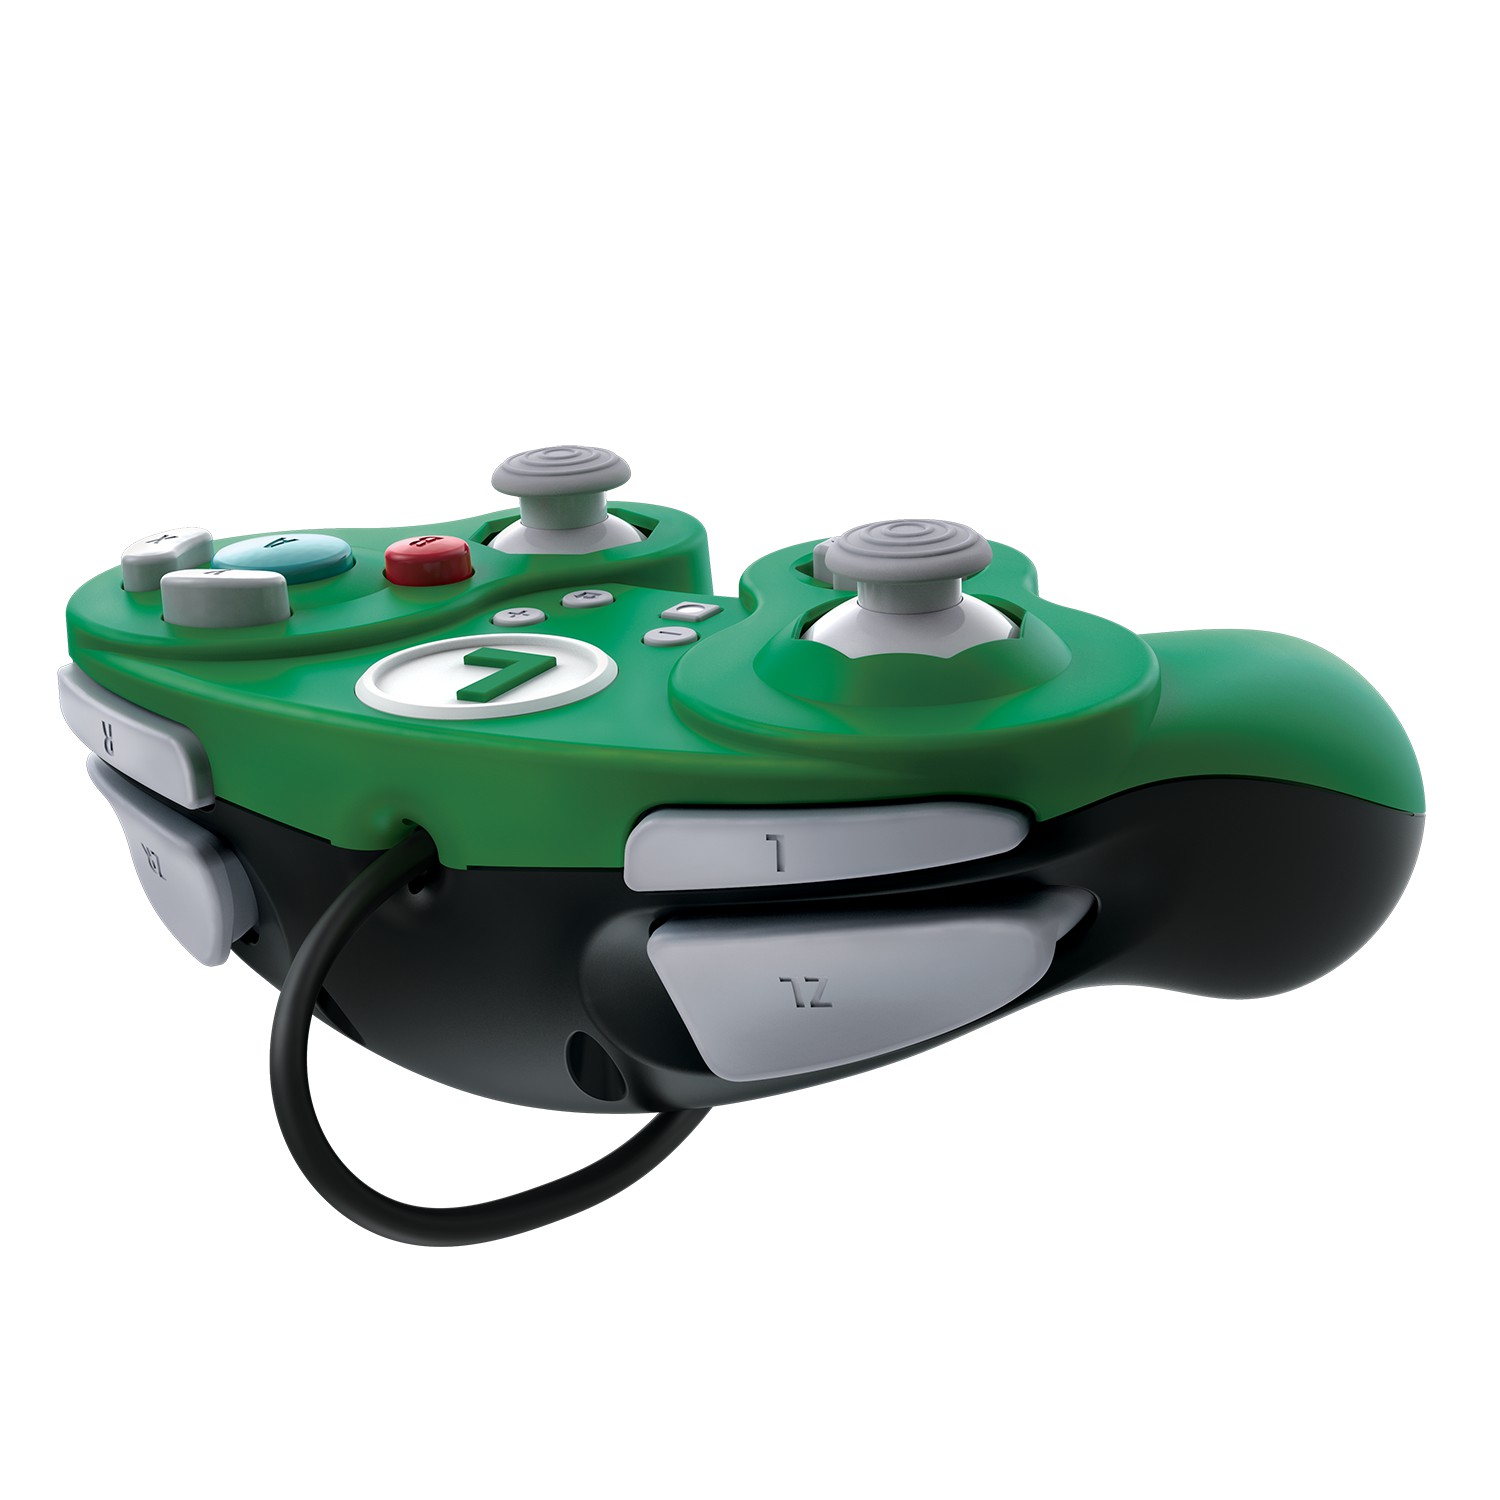 PDP Wired Fight Pad Pro - luigi For Nintendo Switch